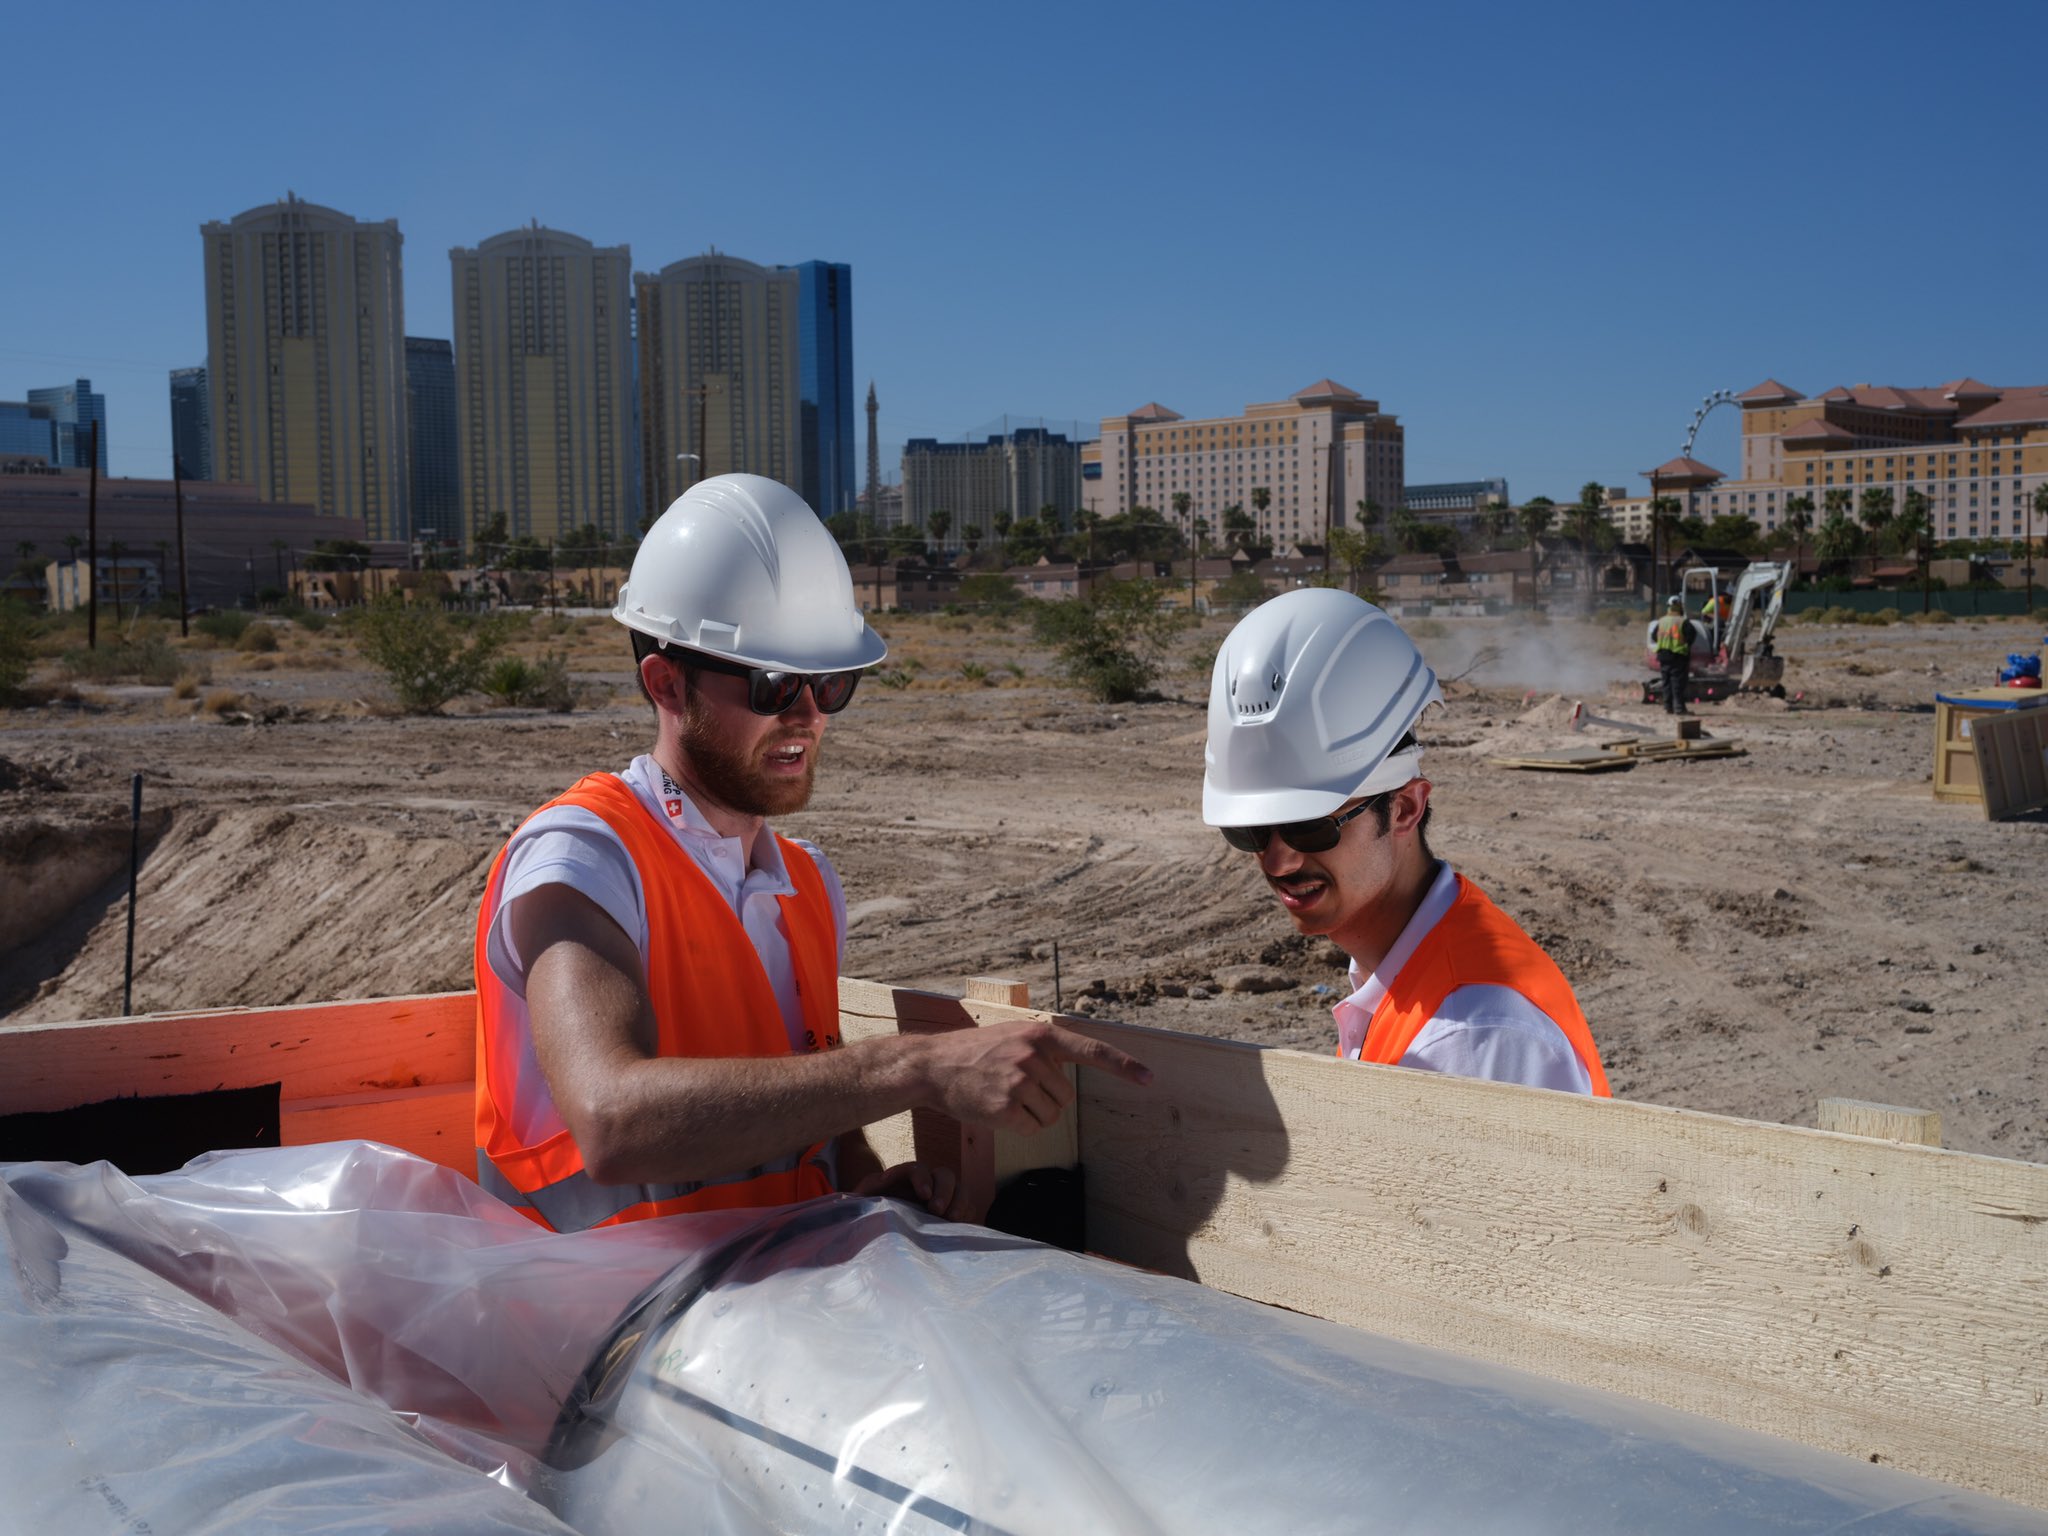 The Swissloop Tunneling team working at the competition site in Las Vegas to prepare the Groundhog Alpha machine.